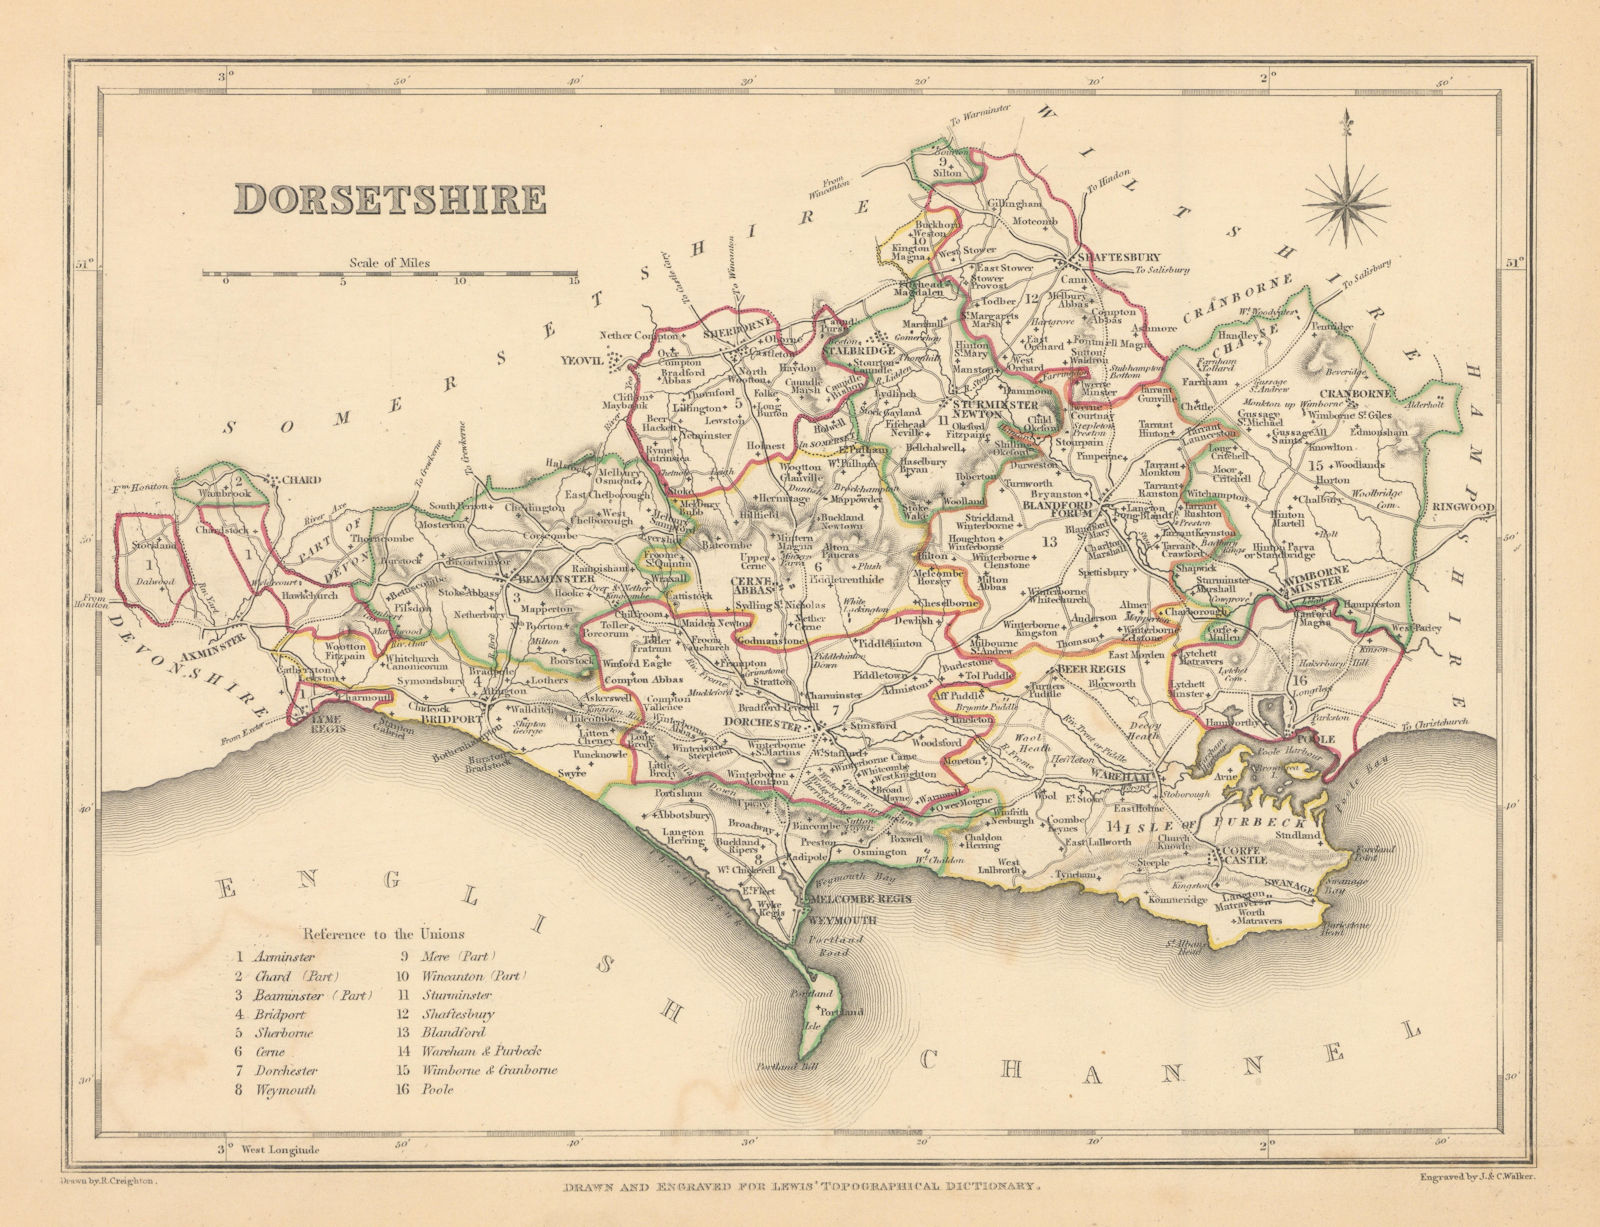 Associate Product Antique county map of DORSETSHIRE by Creighton & Walker for Lewis c1840